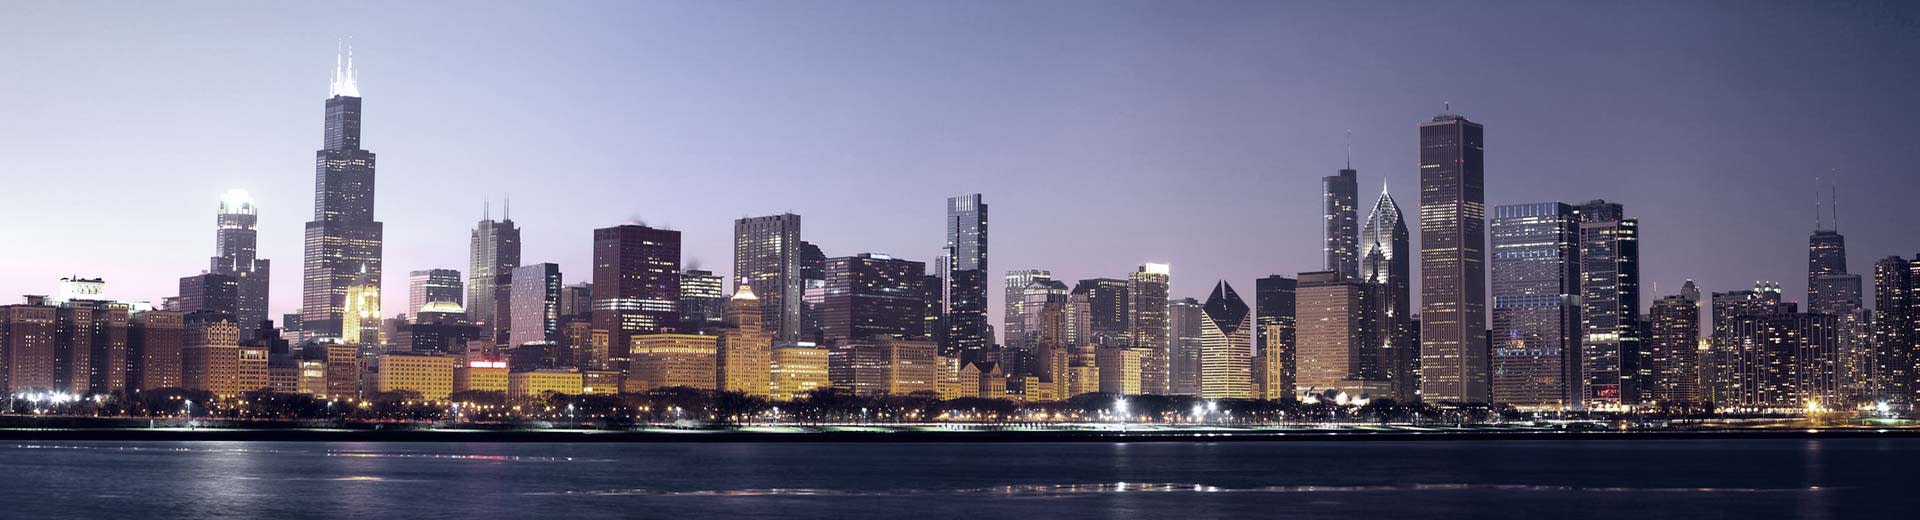 The skyline of Chicago lights up the sky above it, many tall buildings are silhouetted. 